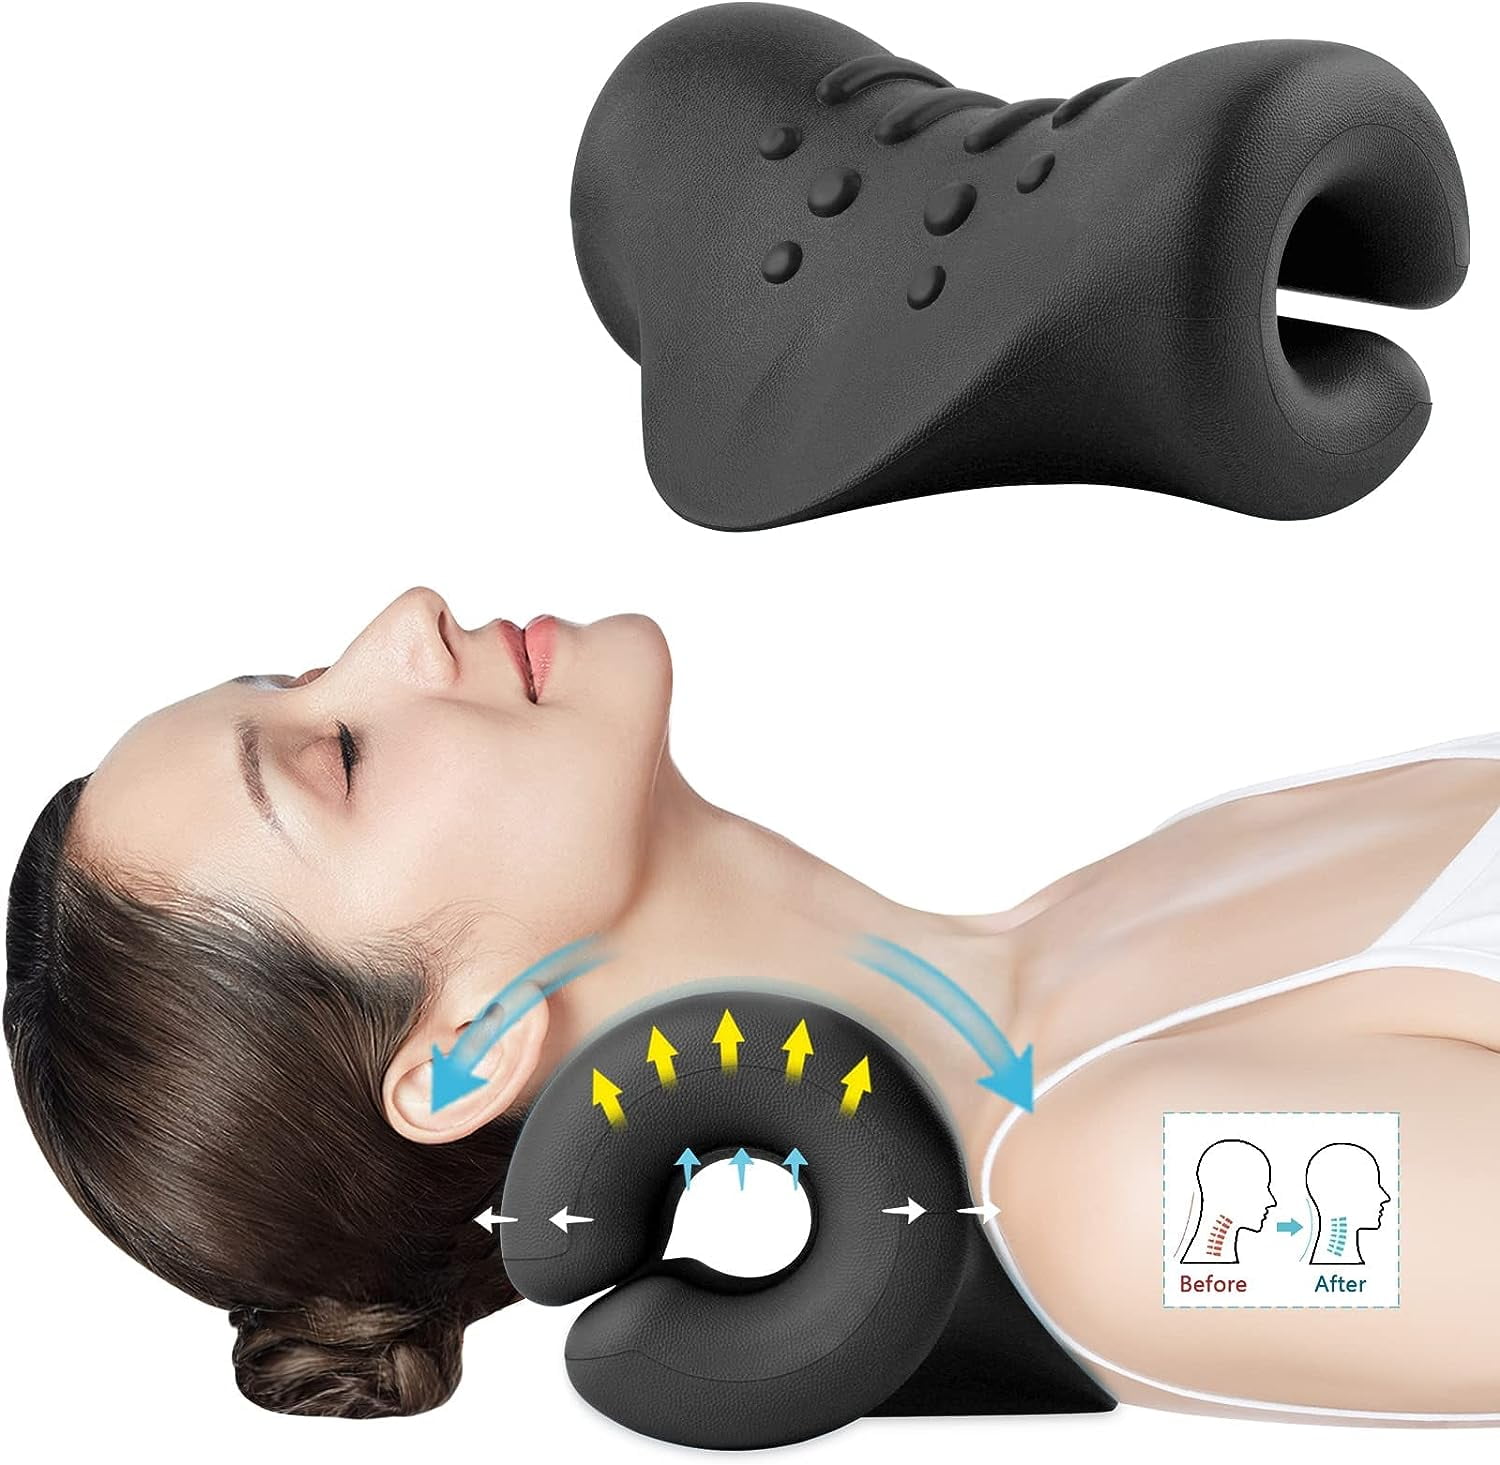 Neck and Shoulder Relaxer,Portable Cervical Traction Device Neck Stretcher, Neck Posture Corrector Chiropractic Pillow for TMJ Pain Relief and Cervical  Spine Alignment,Black 